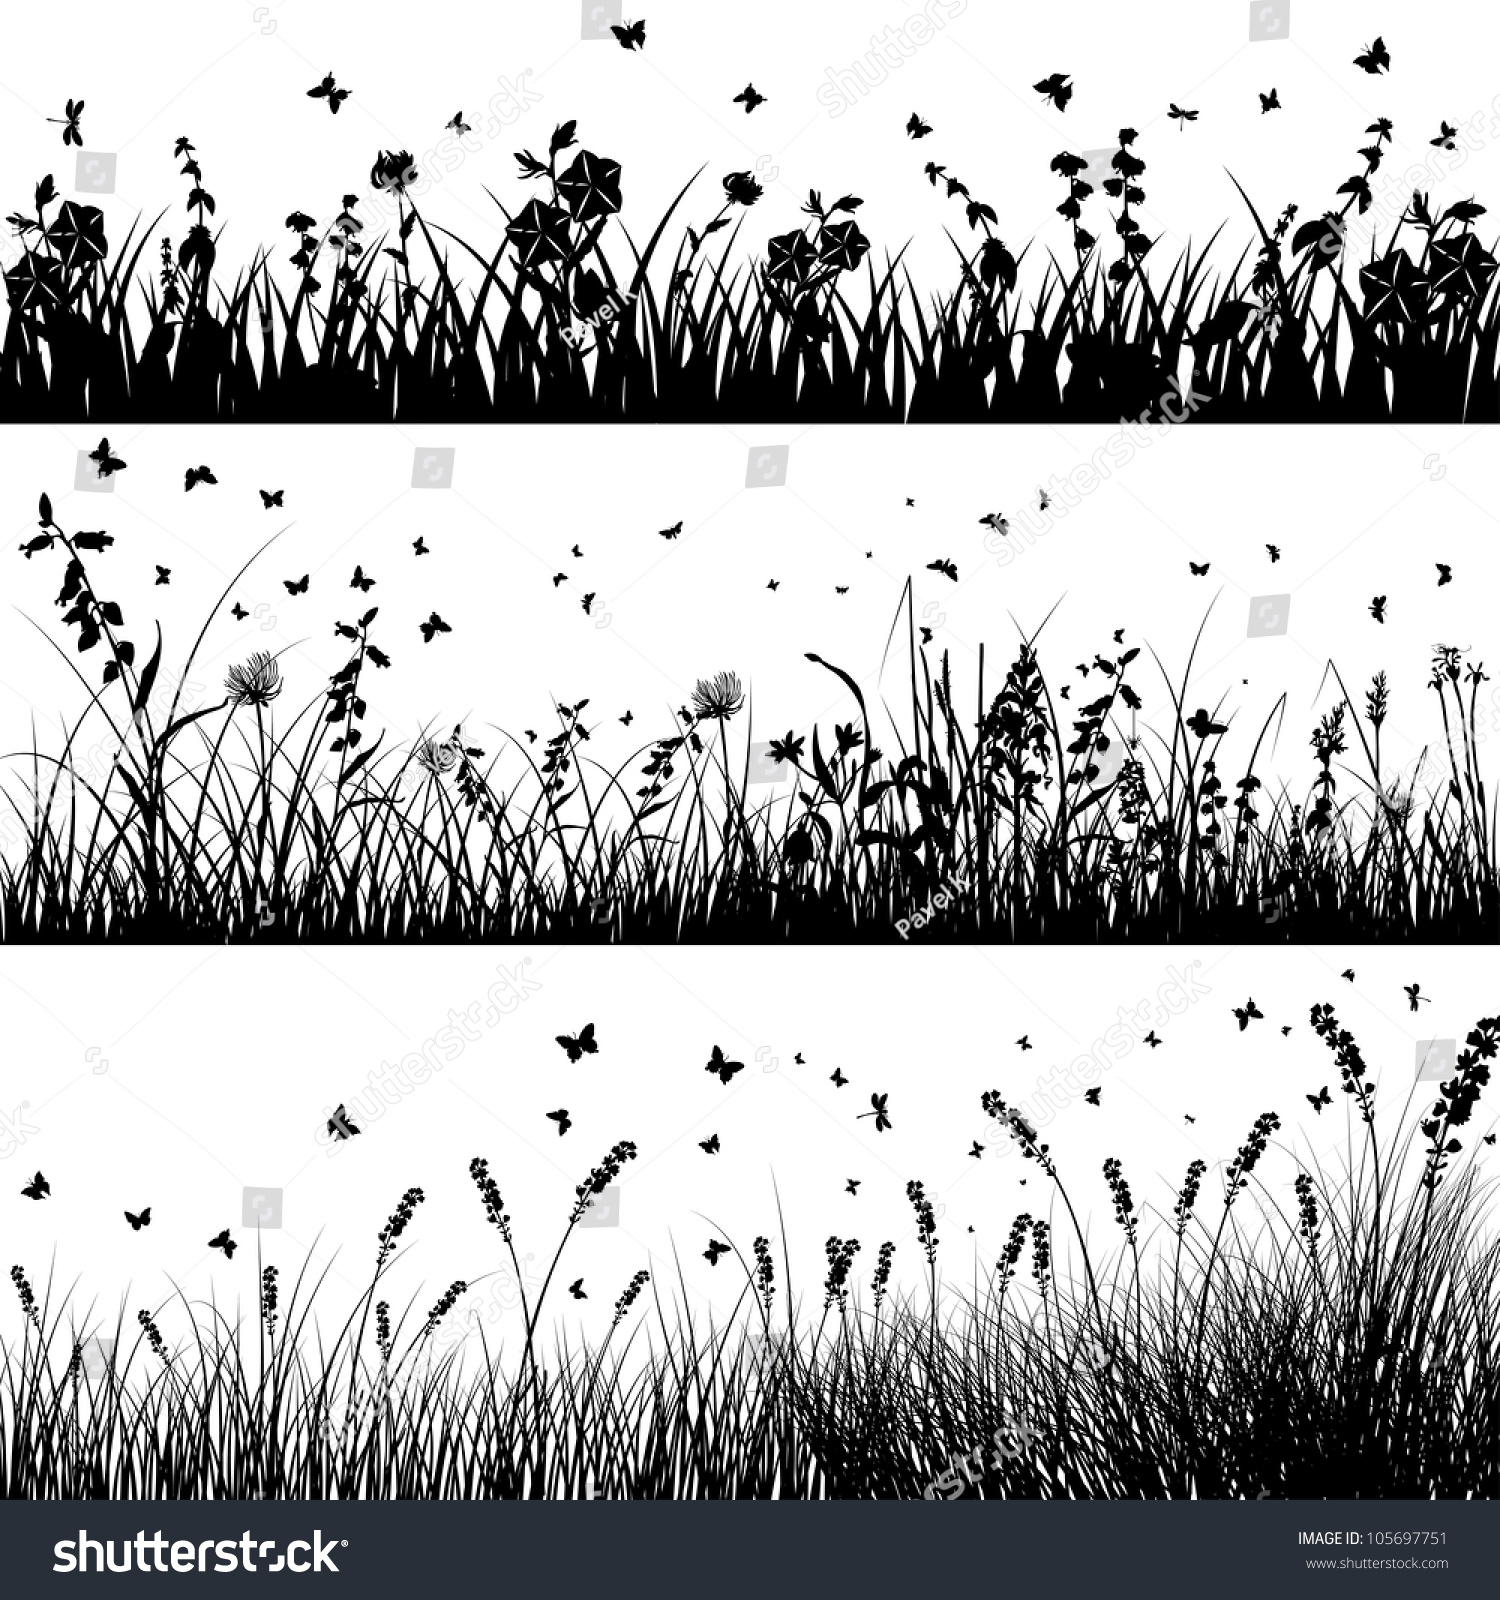 Download Vector Grass Silhouette Background Set All Stock Vector ...